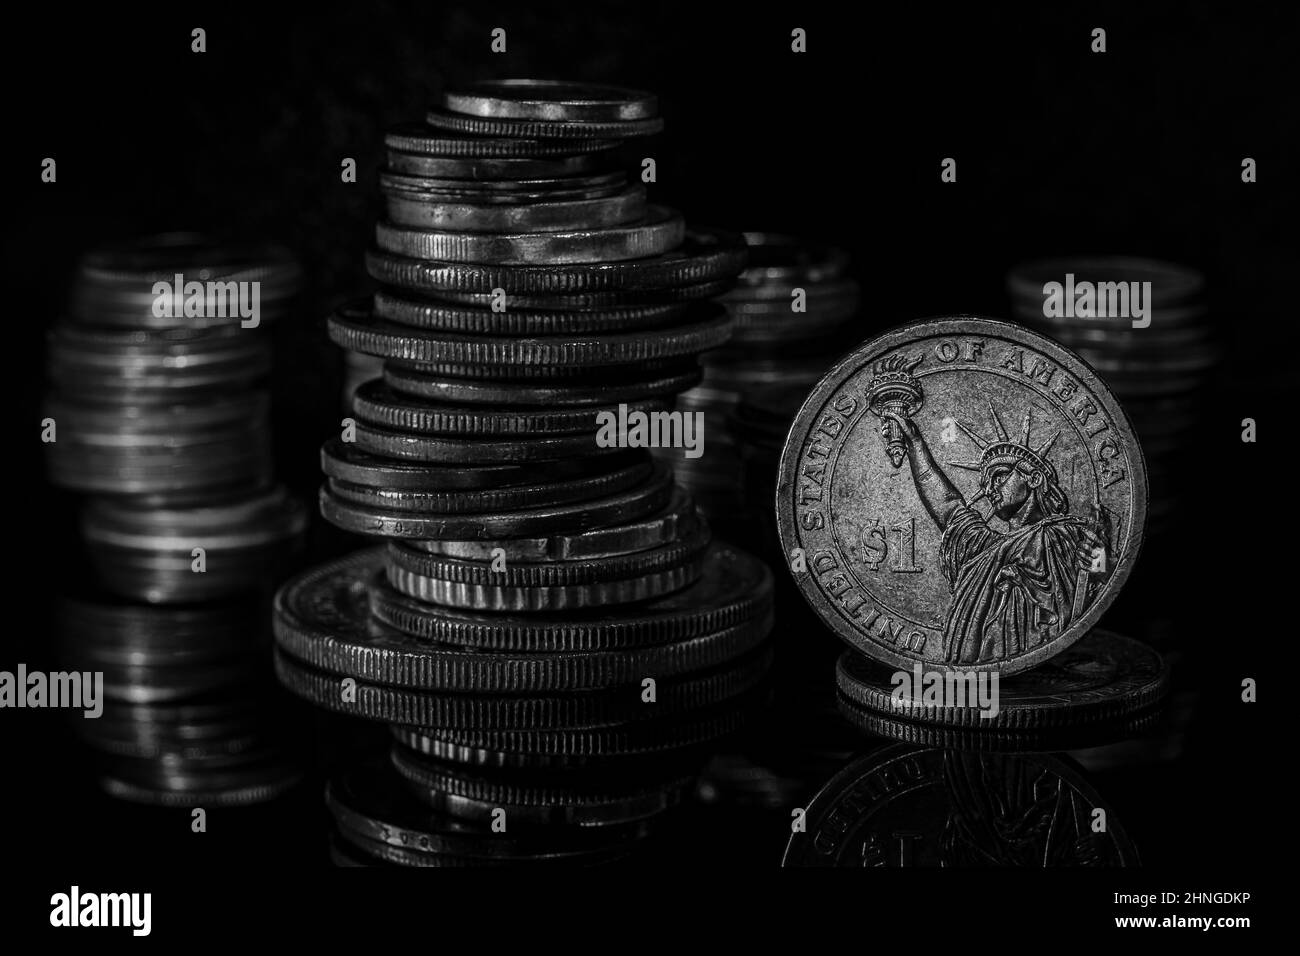 Stacks of Coins One Dollar Coin Blurred Background Dramatic Light Black and White Stock Photo